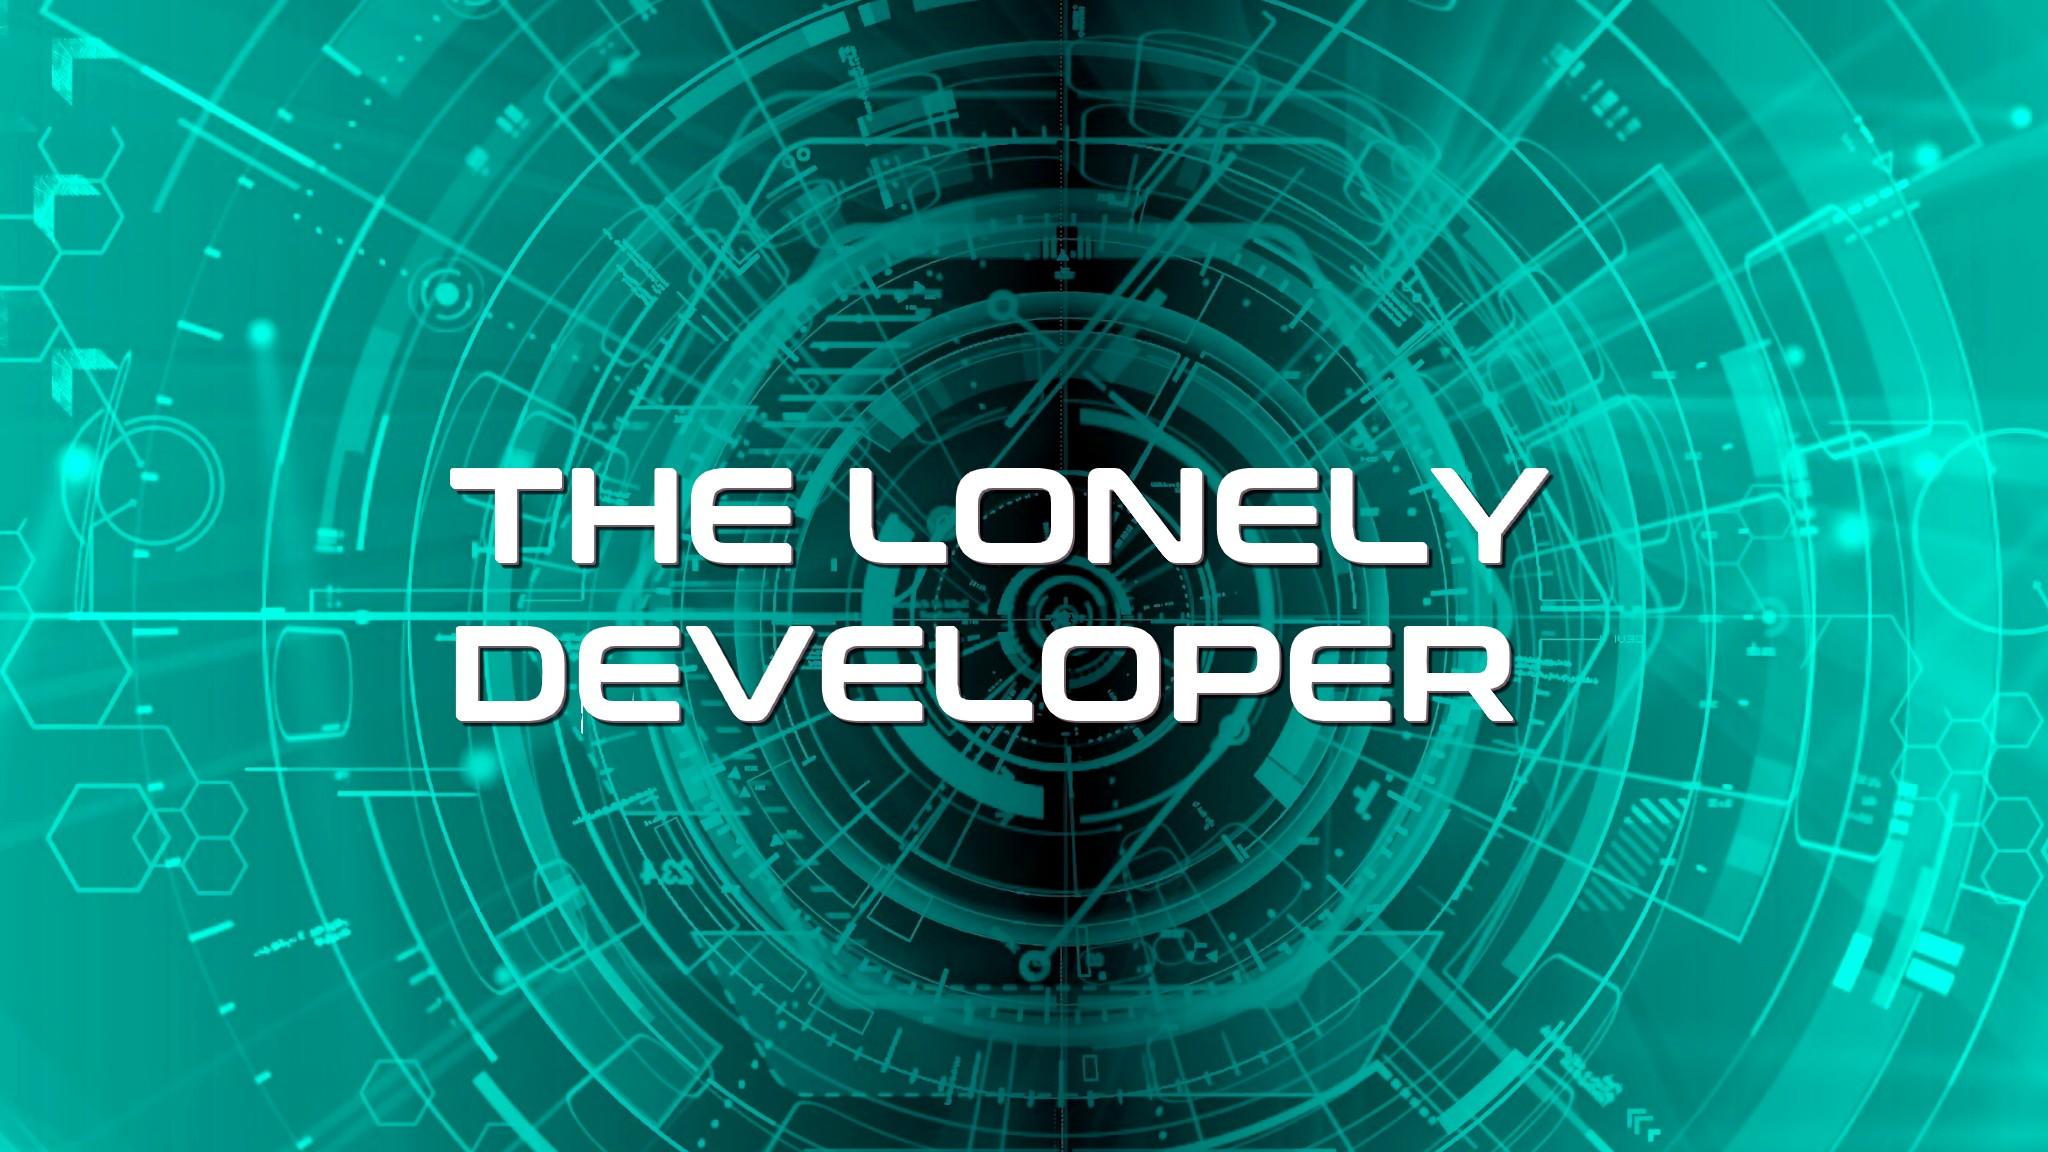 The Lonely Developer